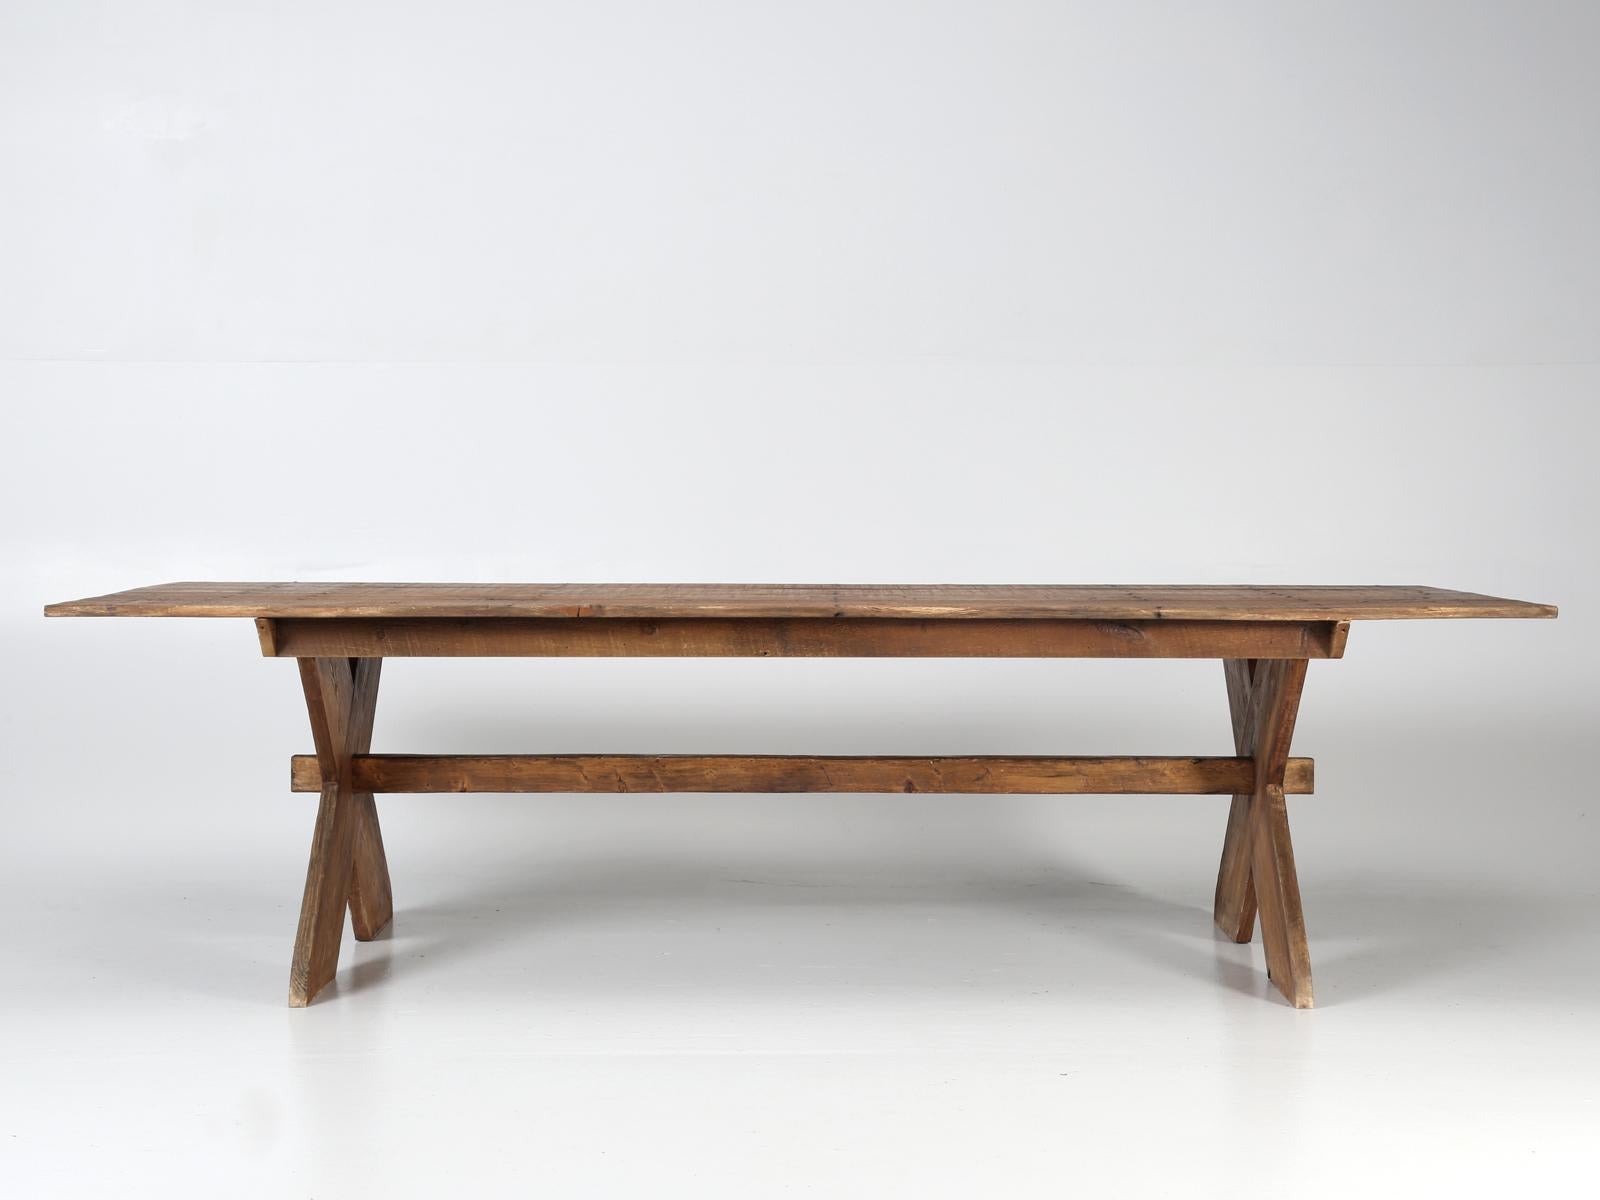 Hand-Crafted American Sawbuck Design Dining Table Made to Order in Reclaimed Wood Any Size For Sale